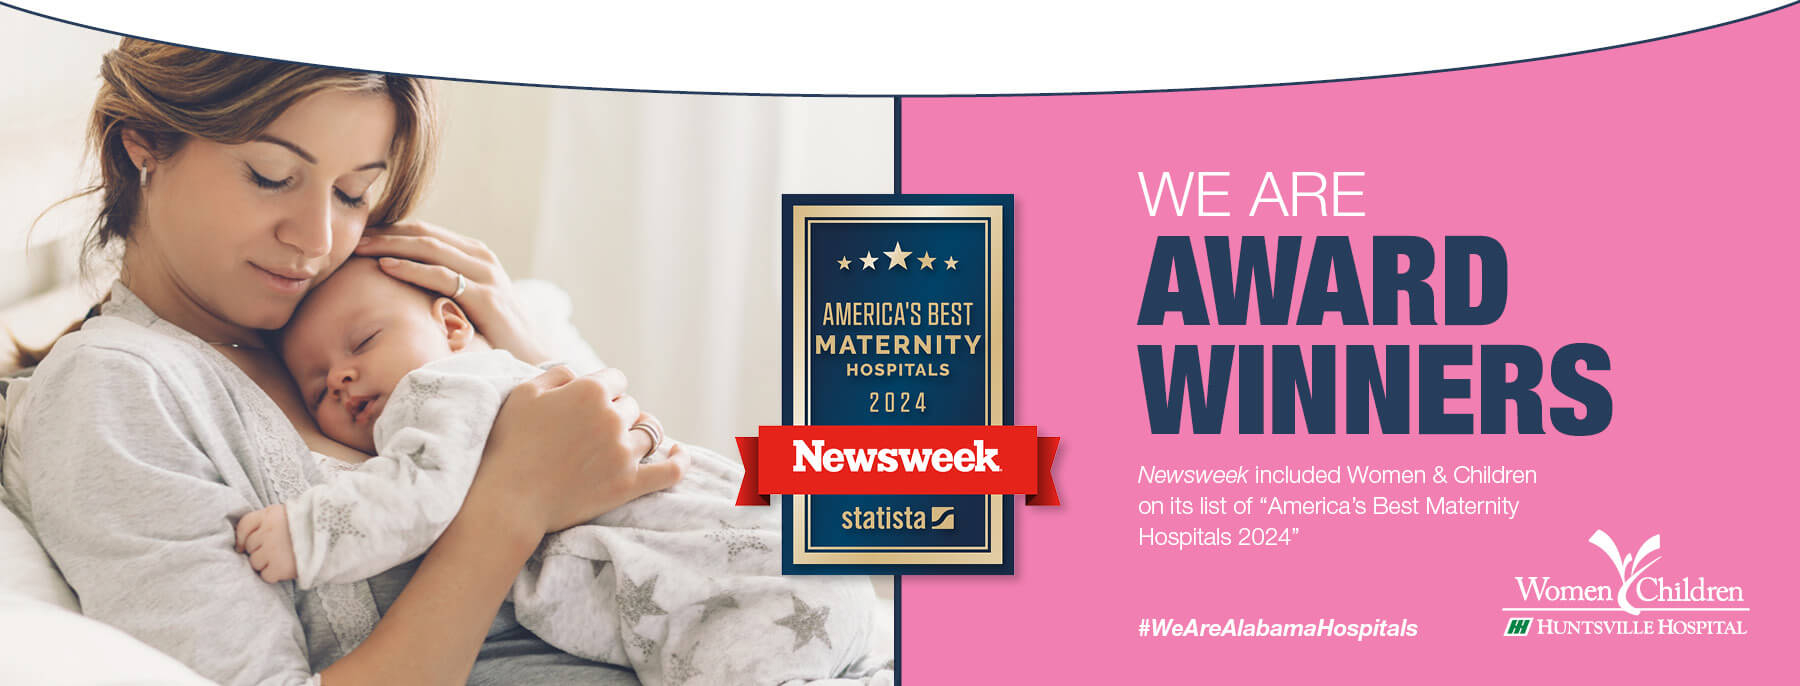 America's Best Maternity Hospitals 2024 by Newsweek